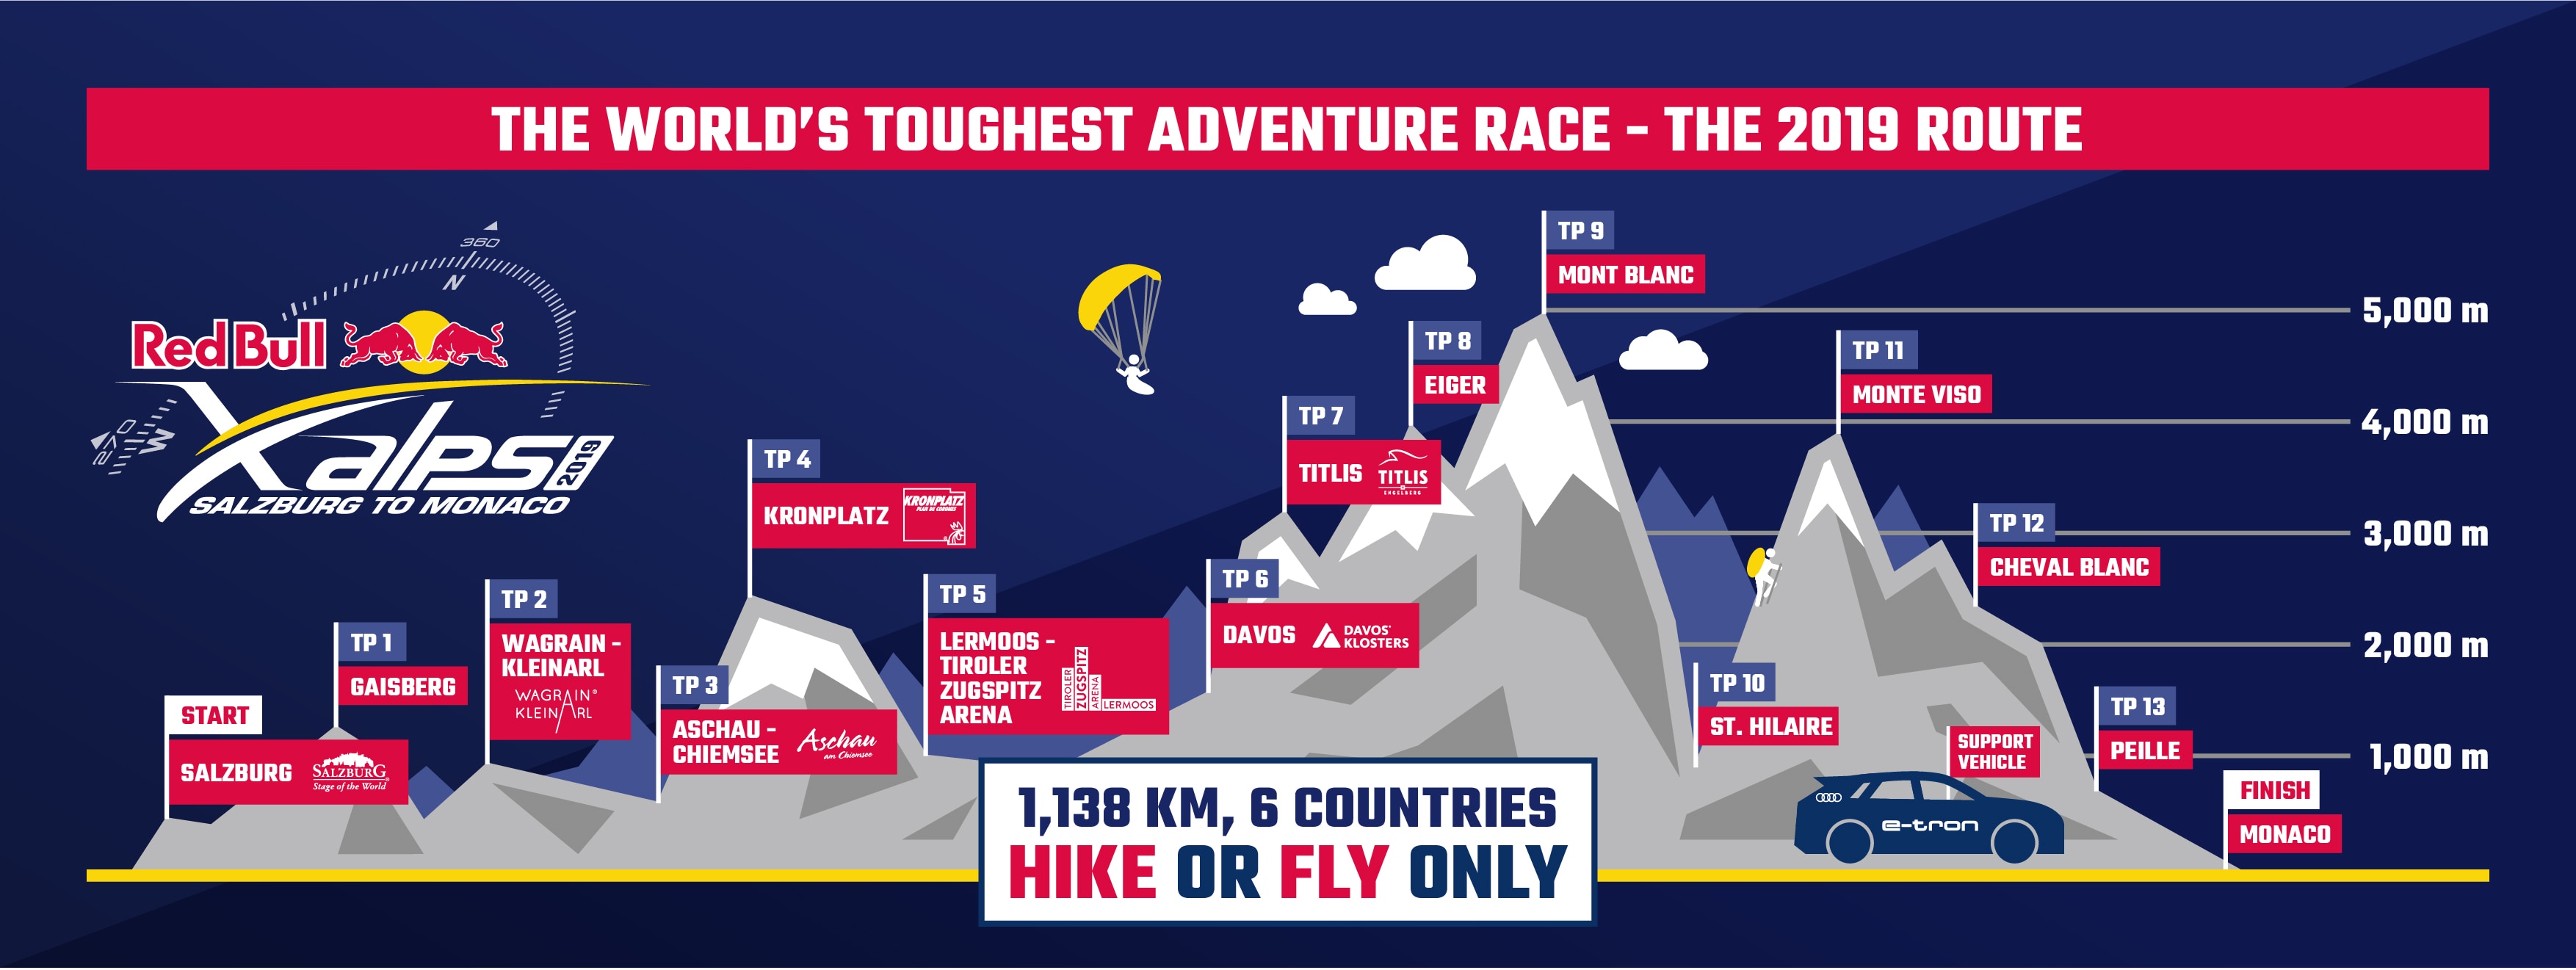 red bull xalps 2019 route infographic audi etron